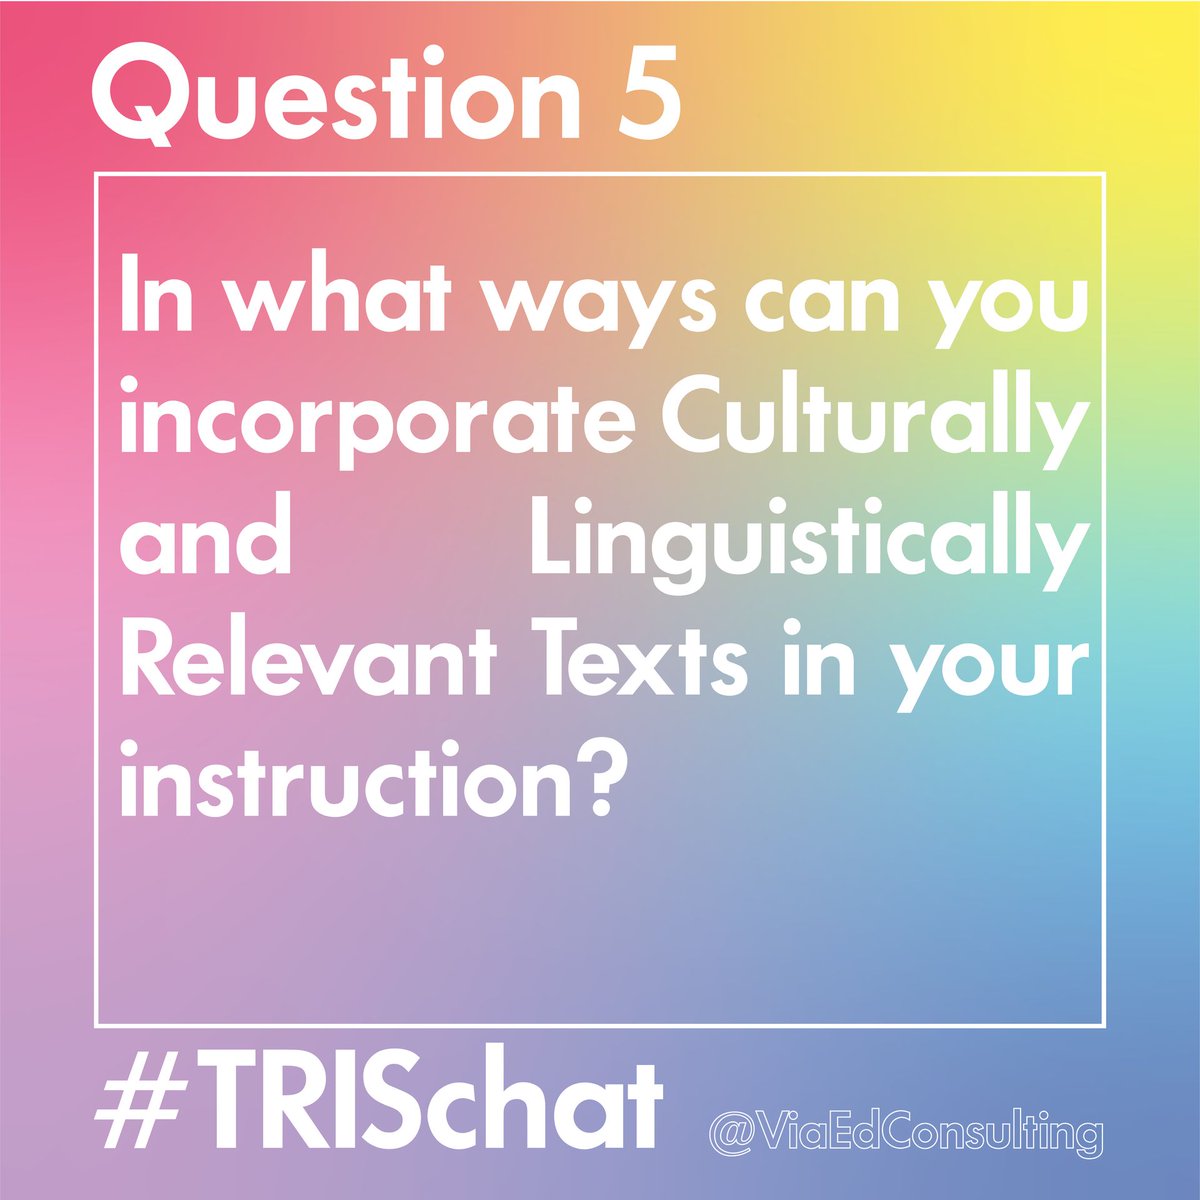 Q5 In what ways can you incorporate Culturally and Linguistically Relevant Texts in your instruction? 🚨Answer this question by April 26 at 7PM CST for a chance to win FREE book from @BooksDelSur! 🚨 #TRISchat